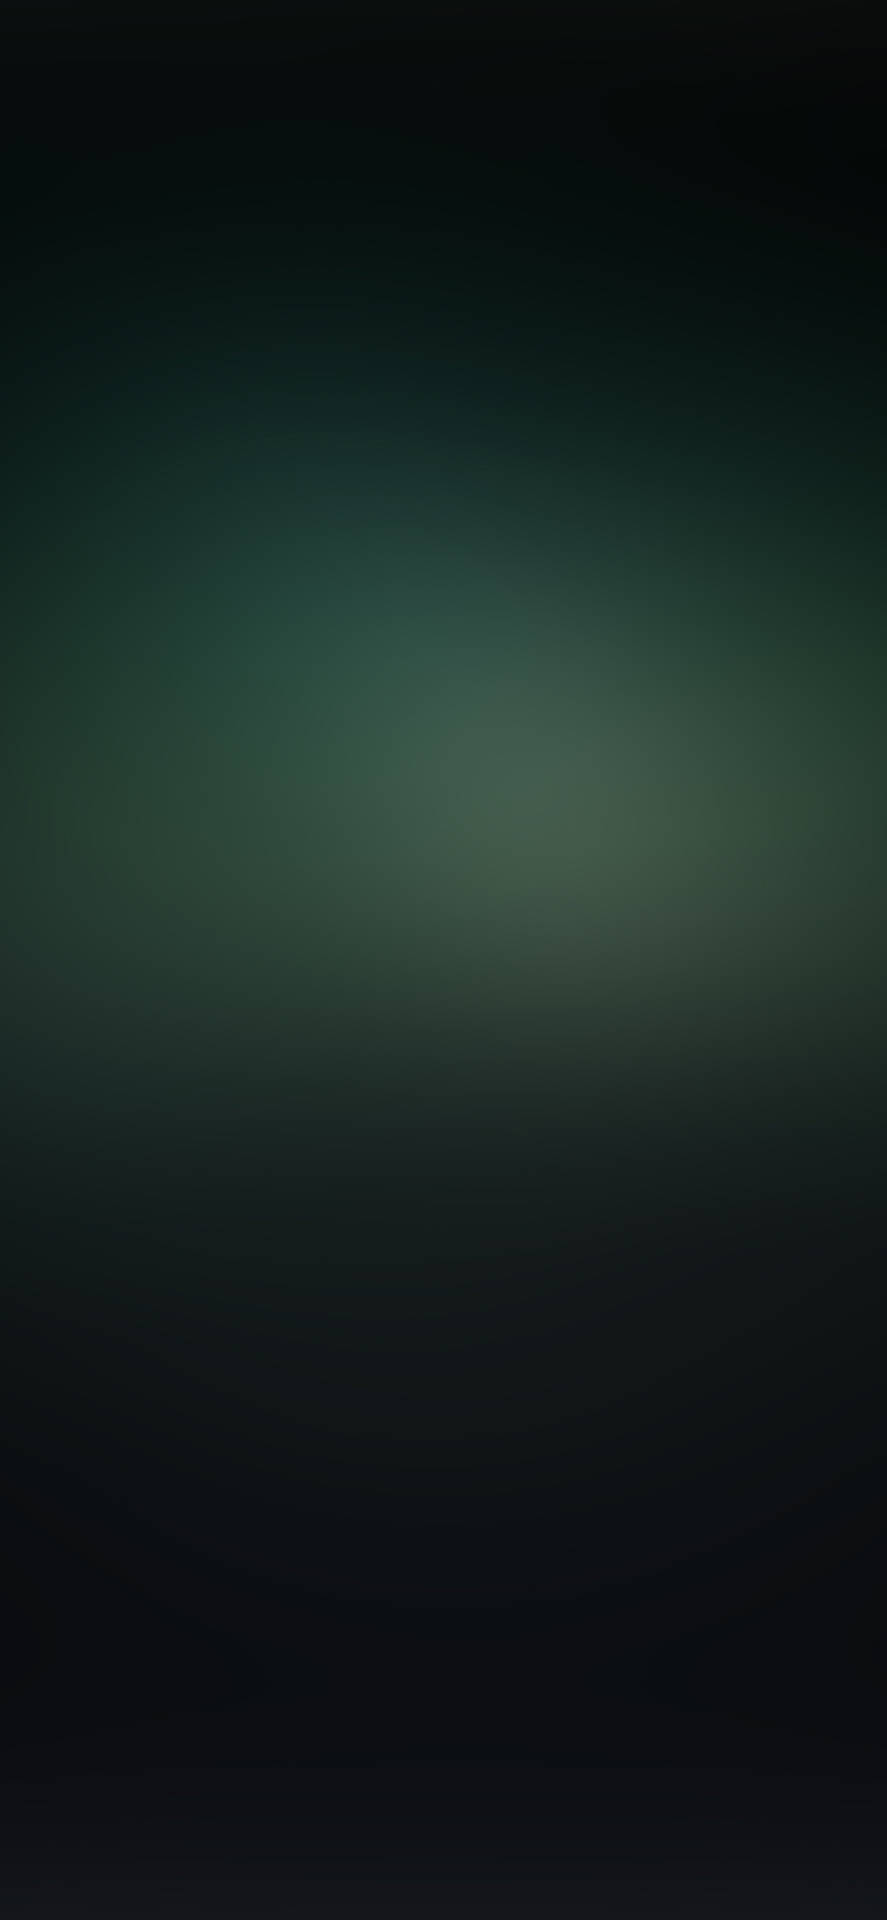 A Dark Green Background With A Blurred Background Wallpaper